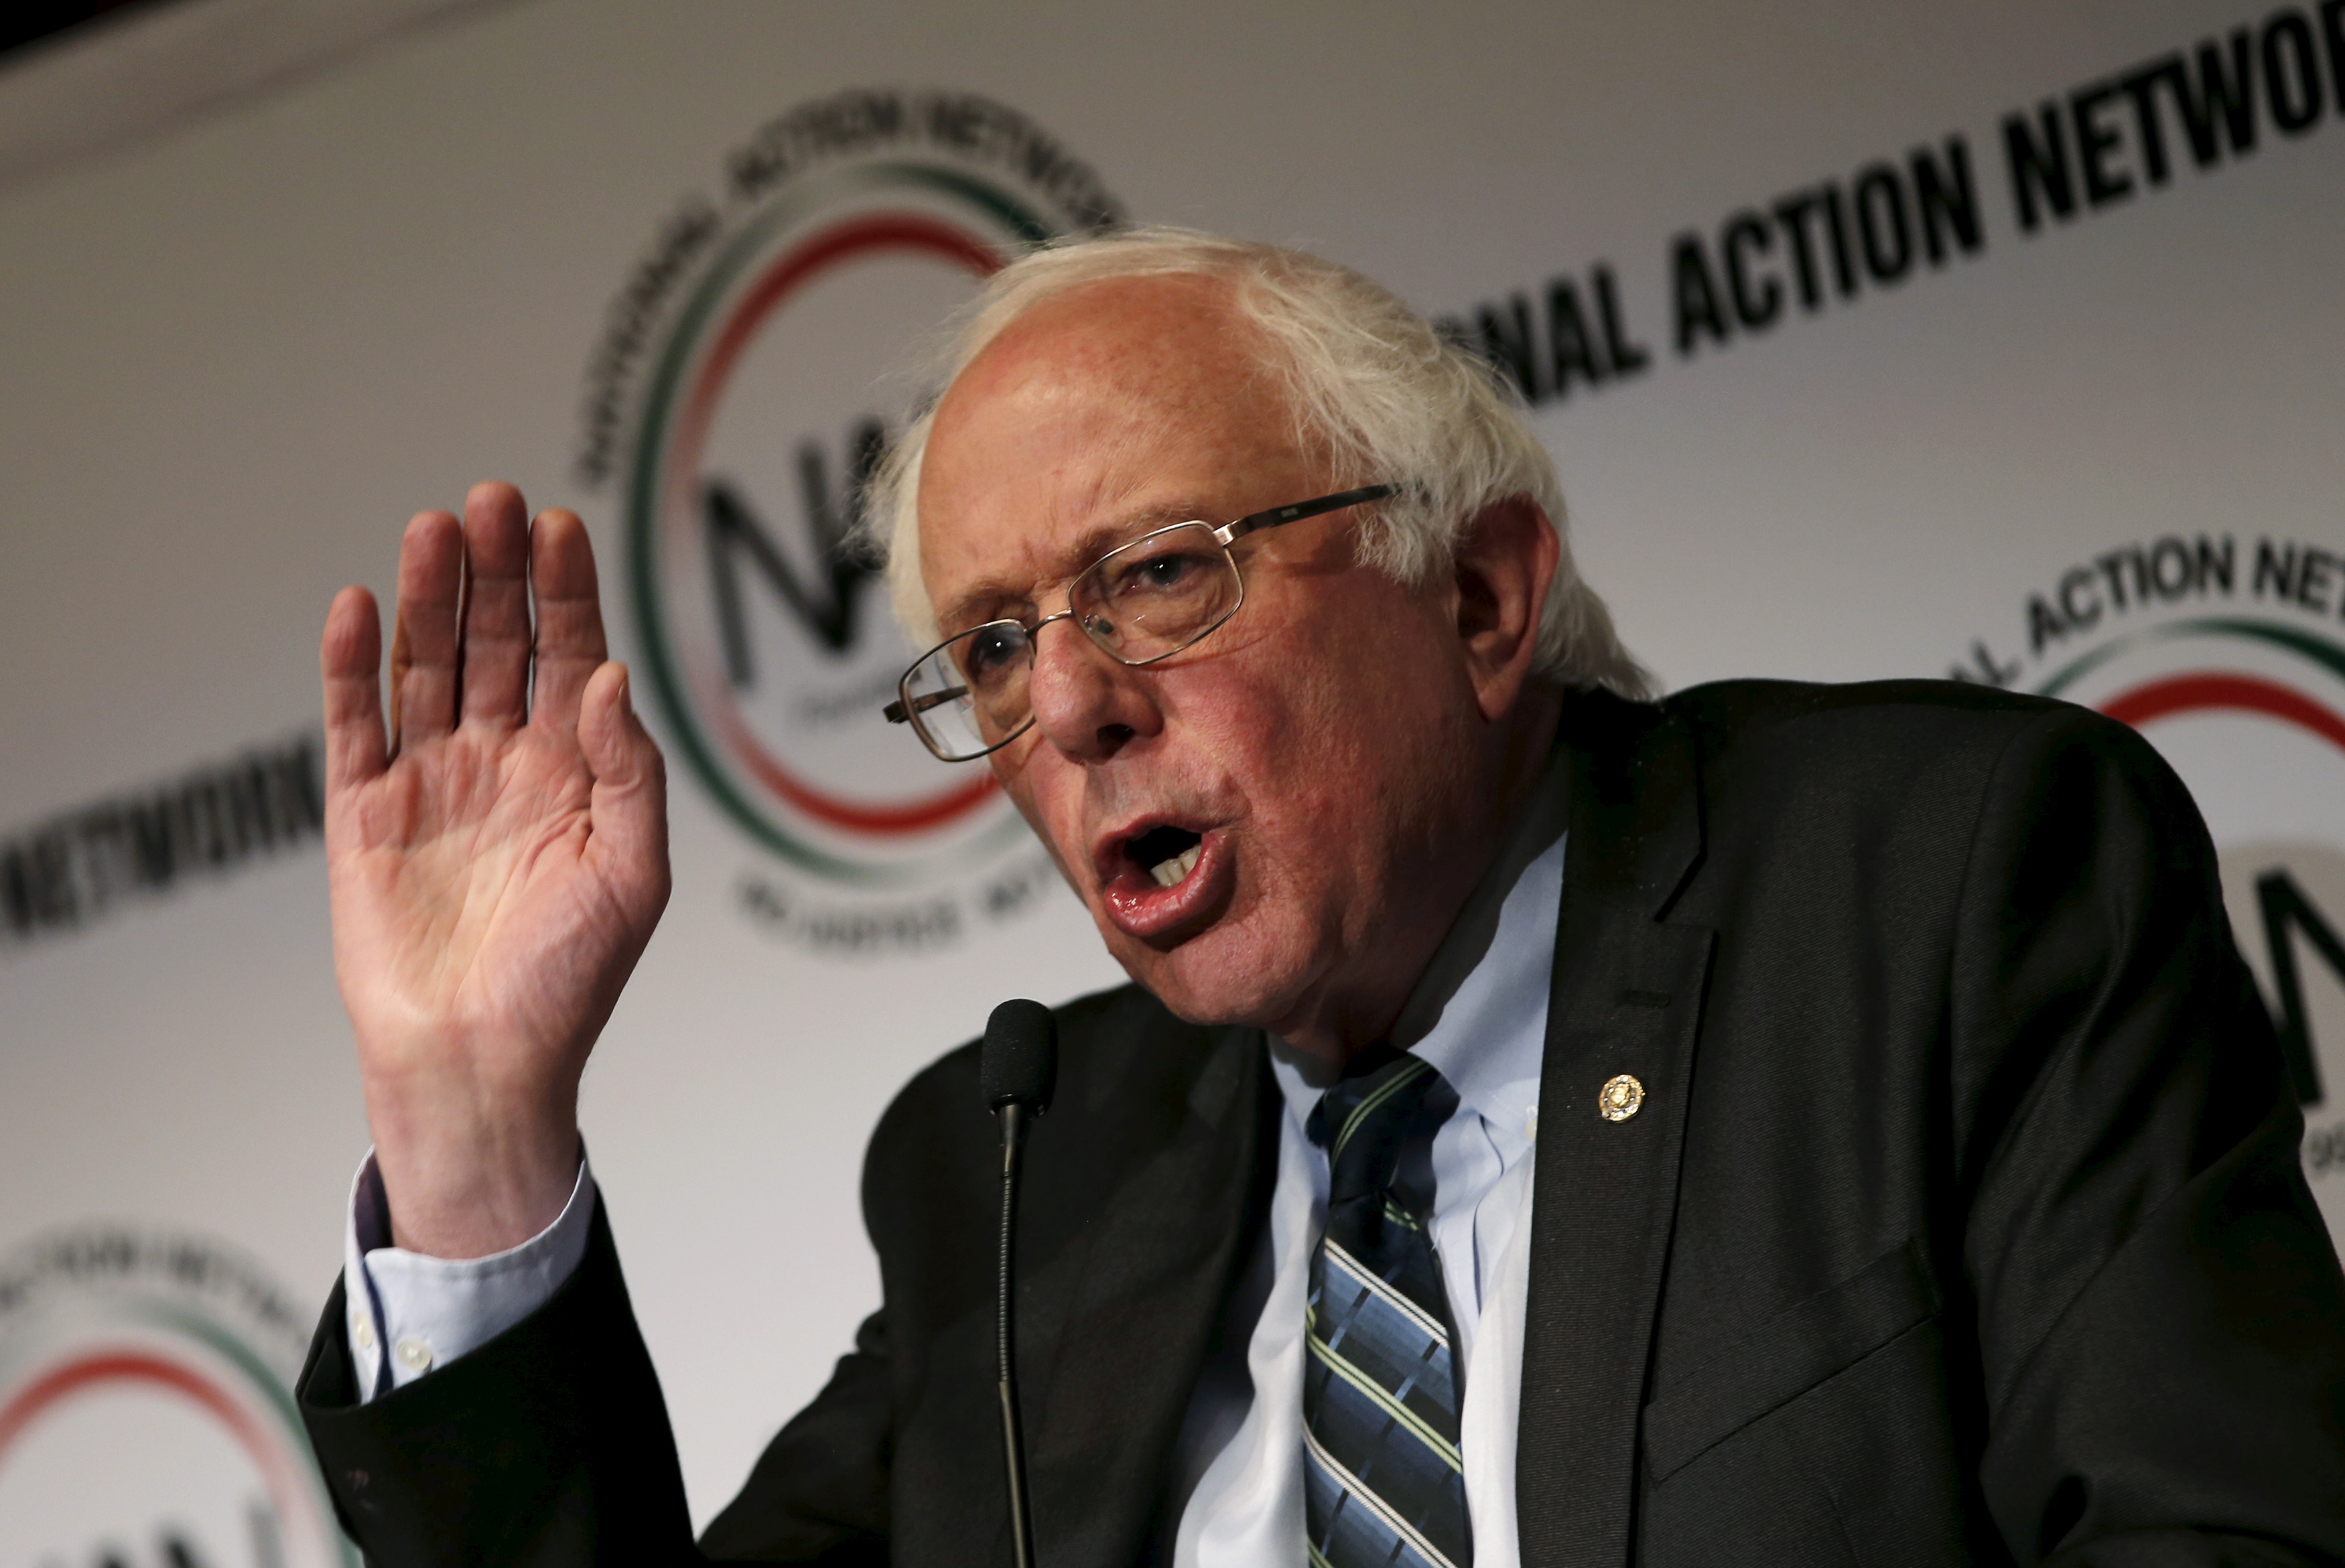 U.S. Senator Bernie Sanders speaks at the opening of the 2015 National Action Network Convention in New York City April 8, 2015.